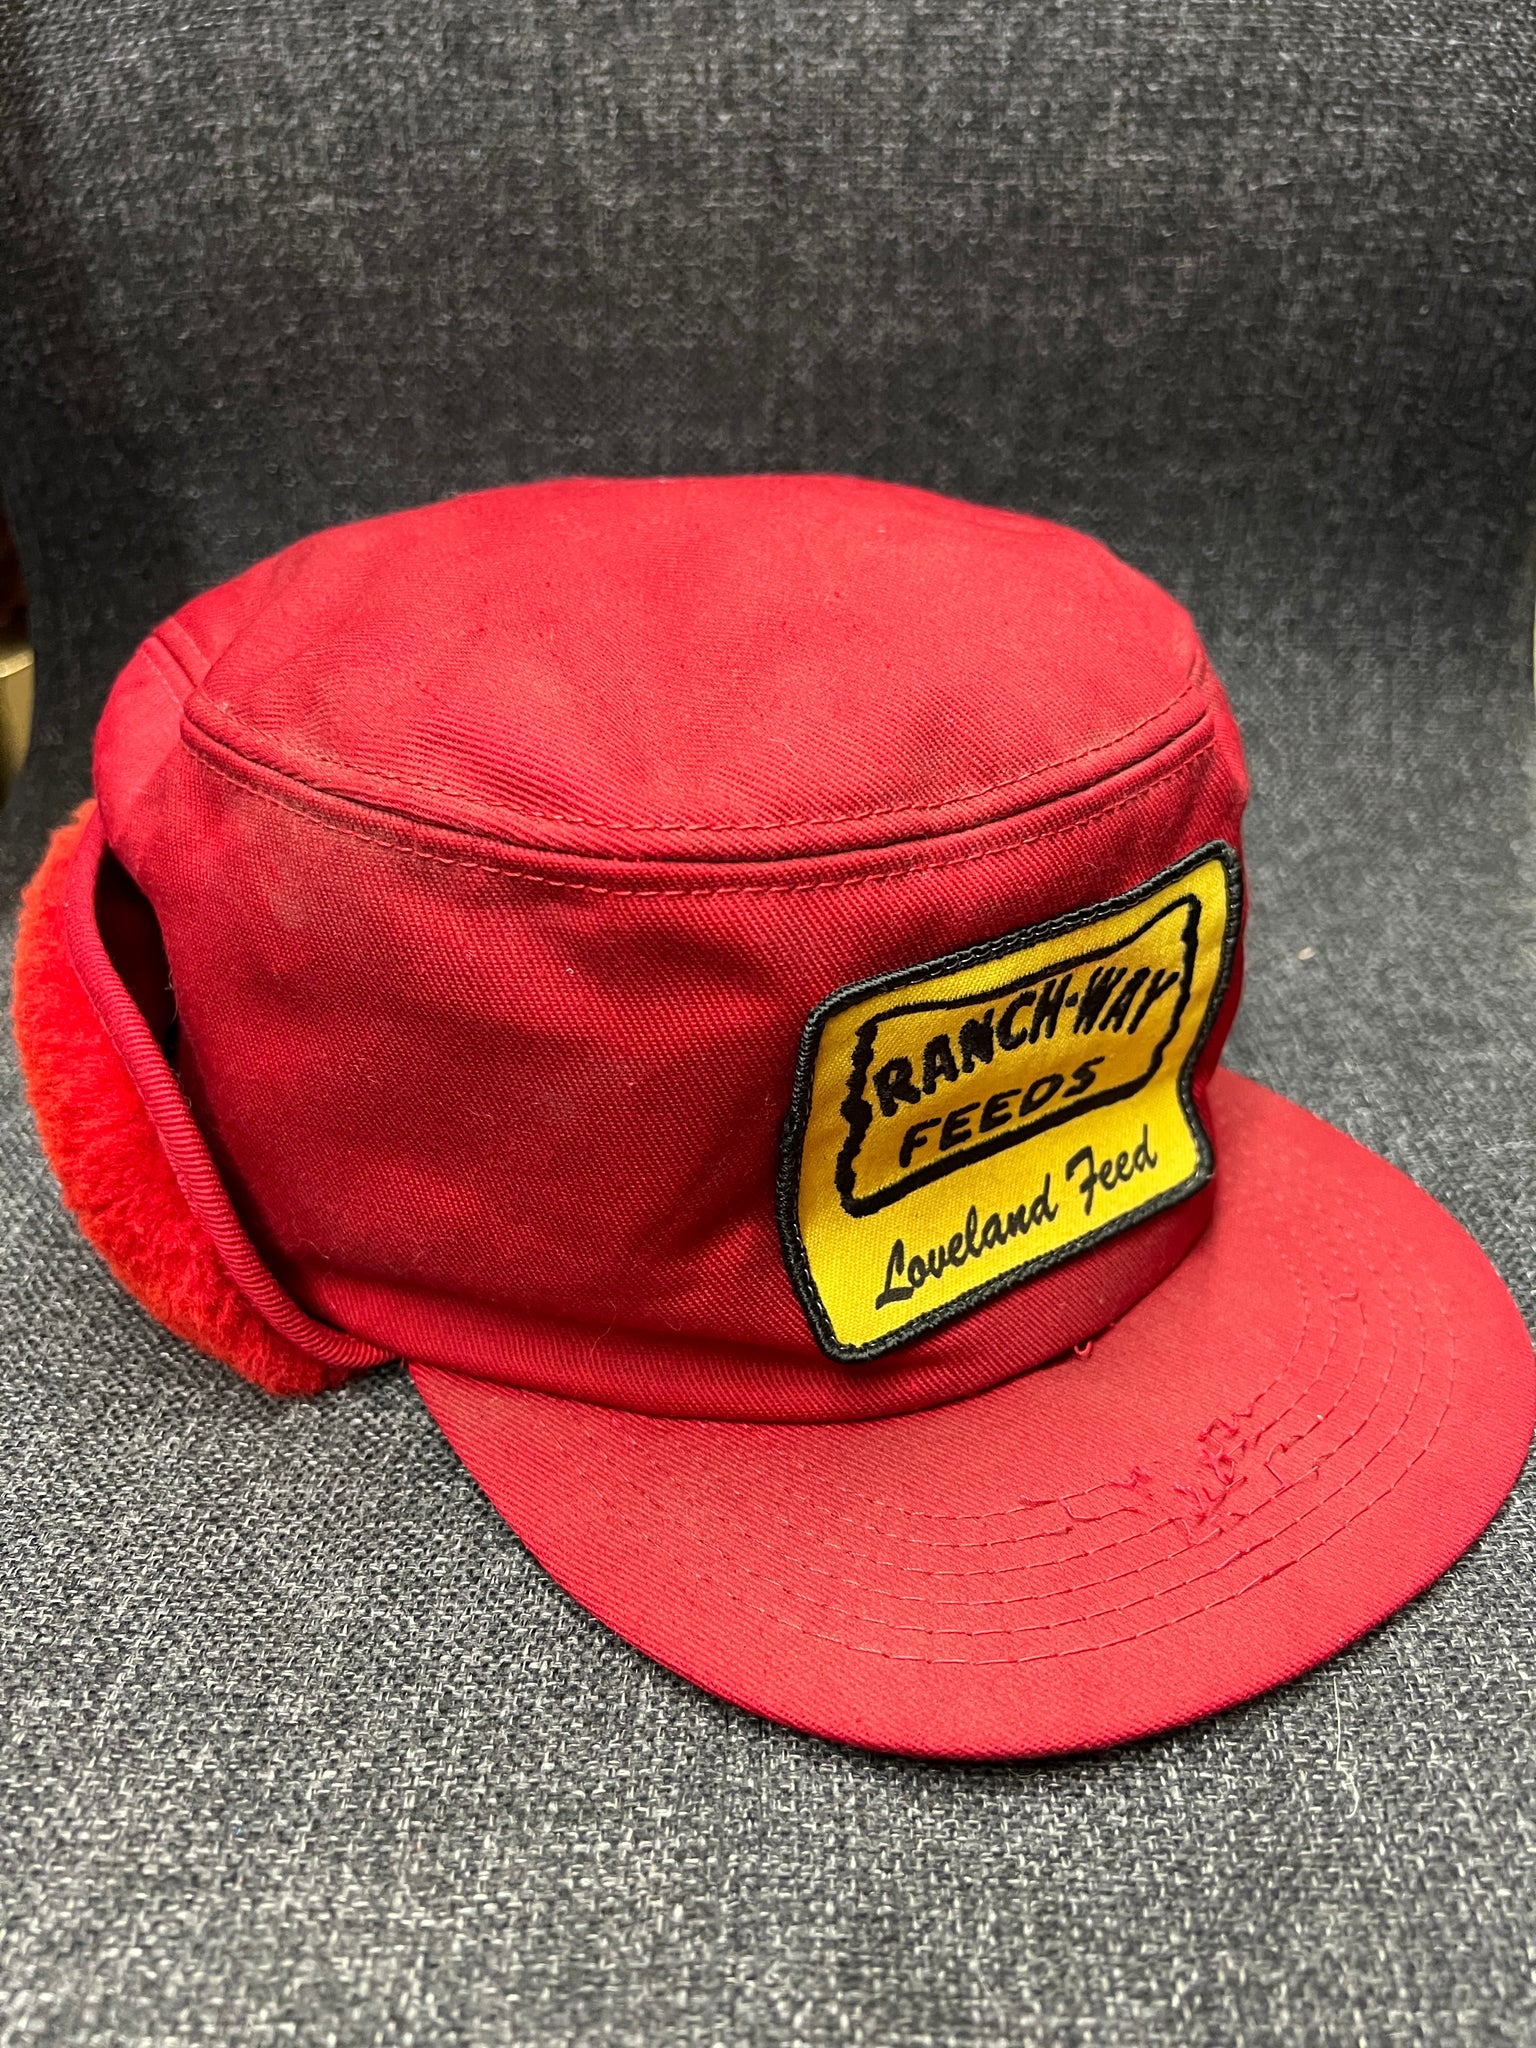 1970s ACCESSORIES- MENS HAT- Ranchway Feeds red hunting (AS IS)